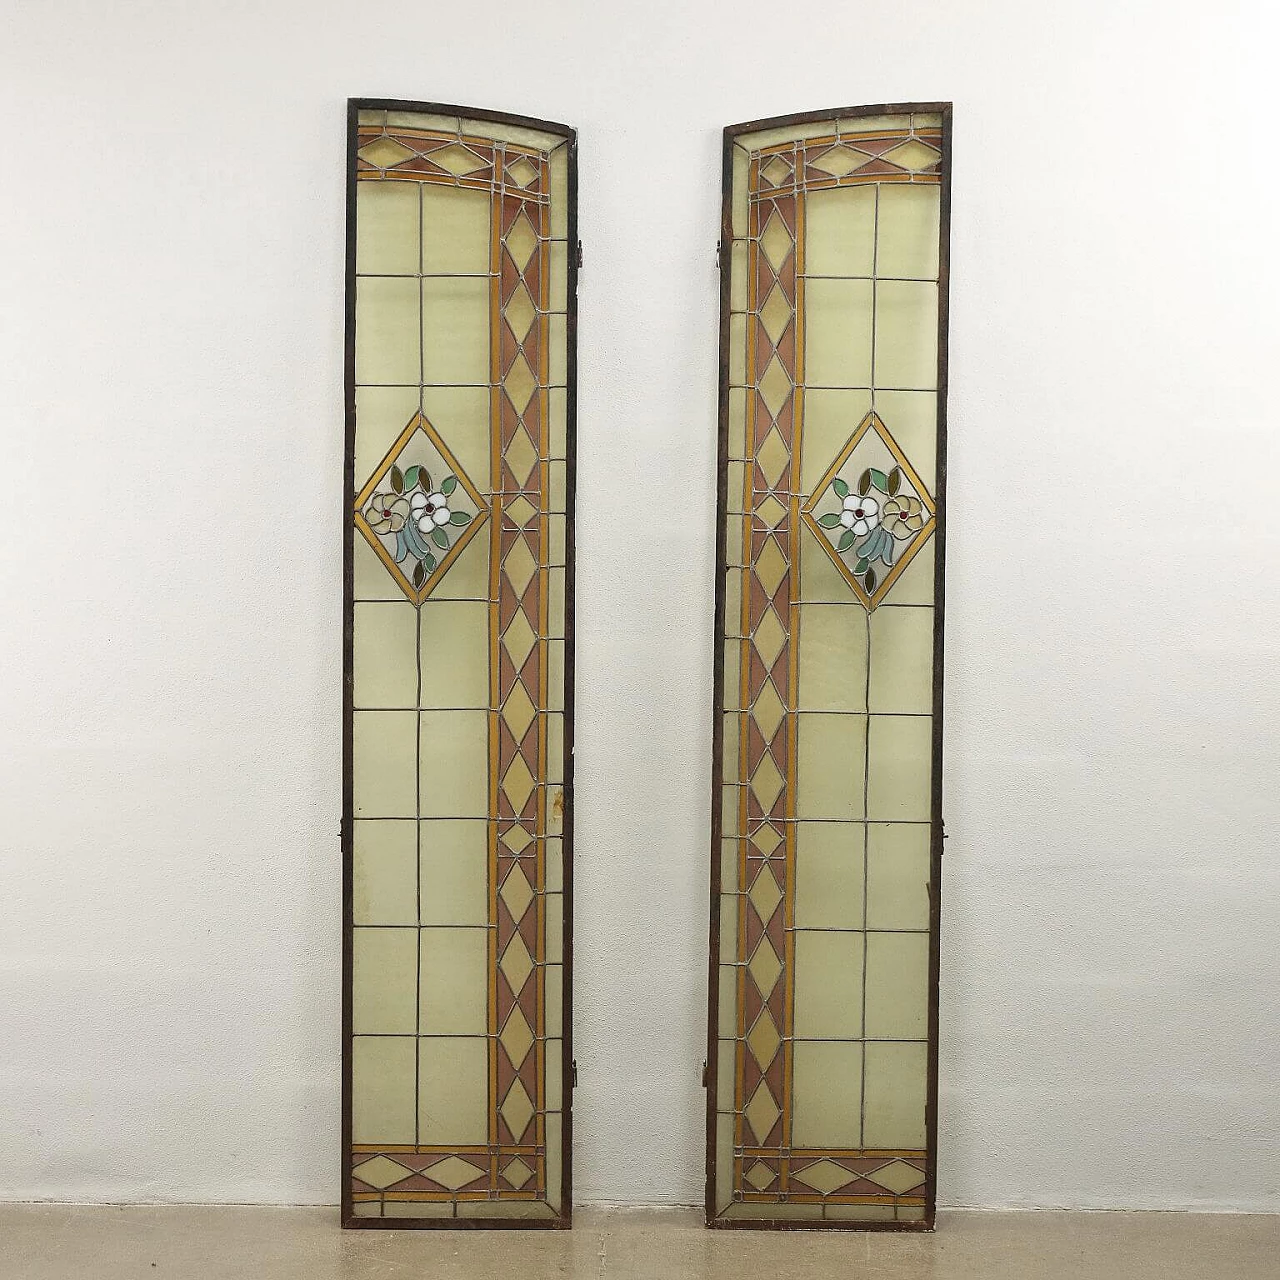 Pair of Art Nouveau glass windows in colored leaded glass, early 20th century 9